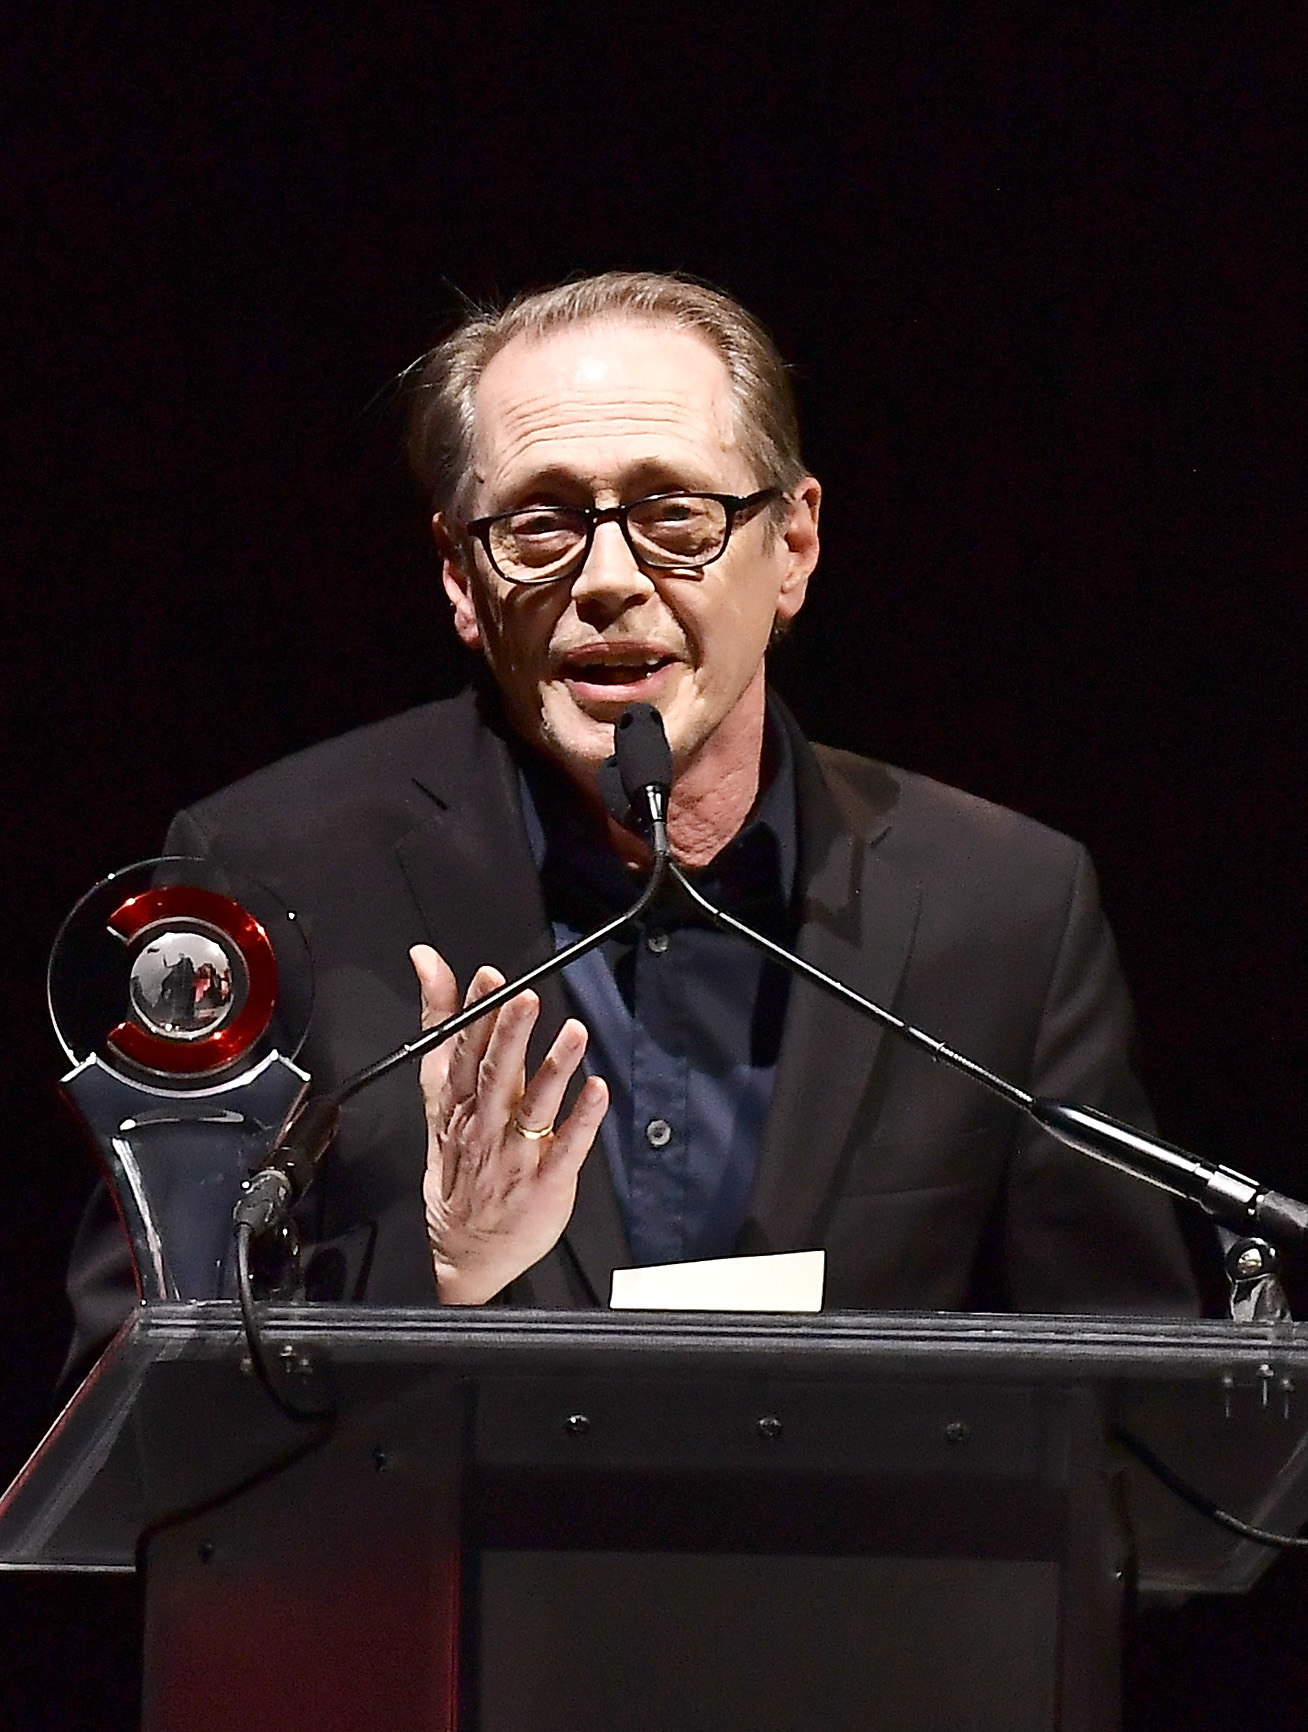 Steve Buscemi gives a speech at The CinemaCon Big Screen Achievement Awards after accepting the Cinema Icon Award in Las Vegas, Nevada, on April 4, 2019 | Source: Getty Images